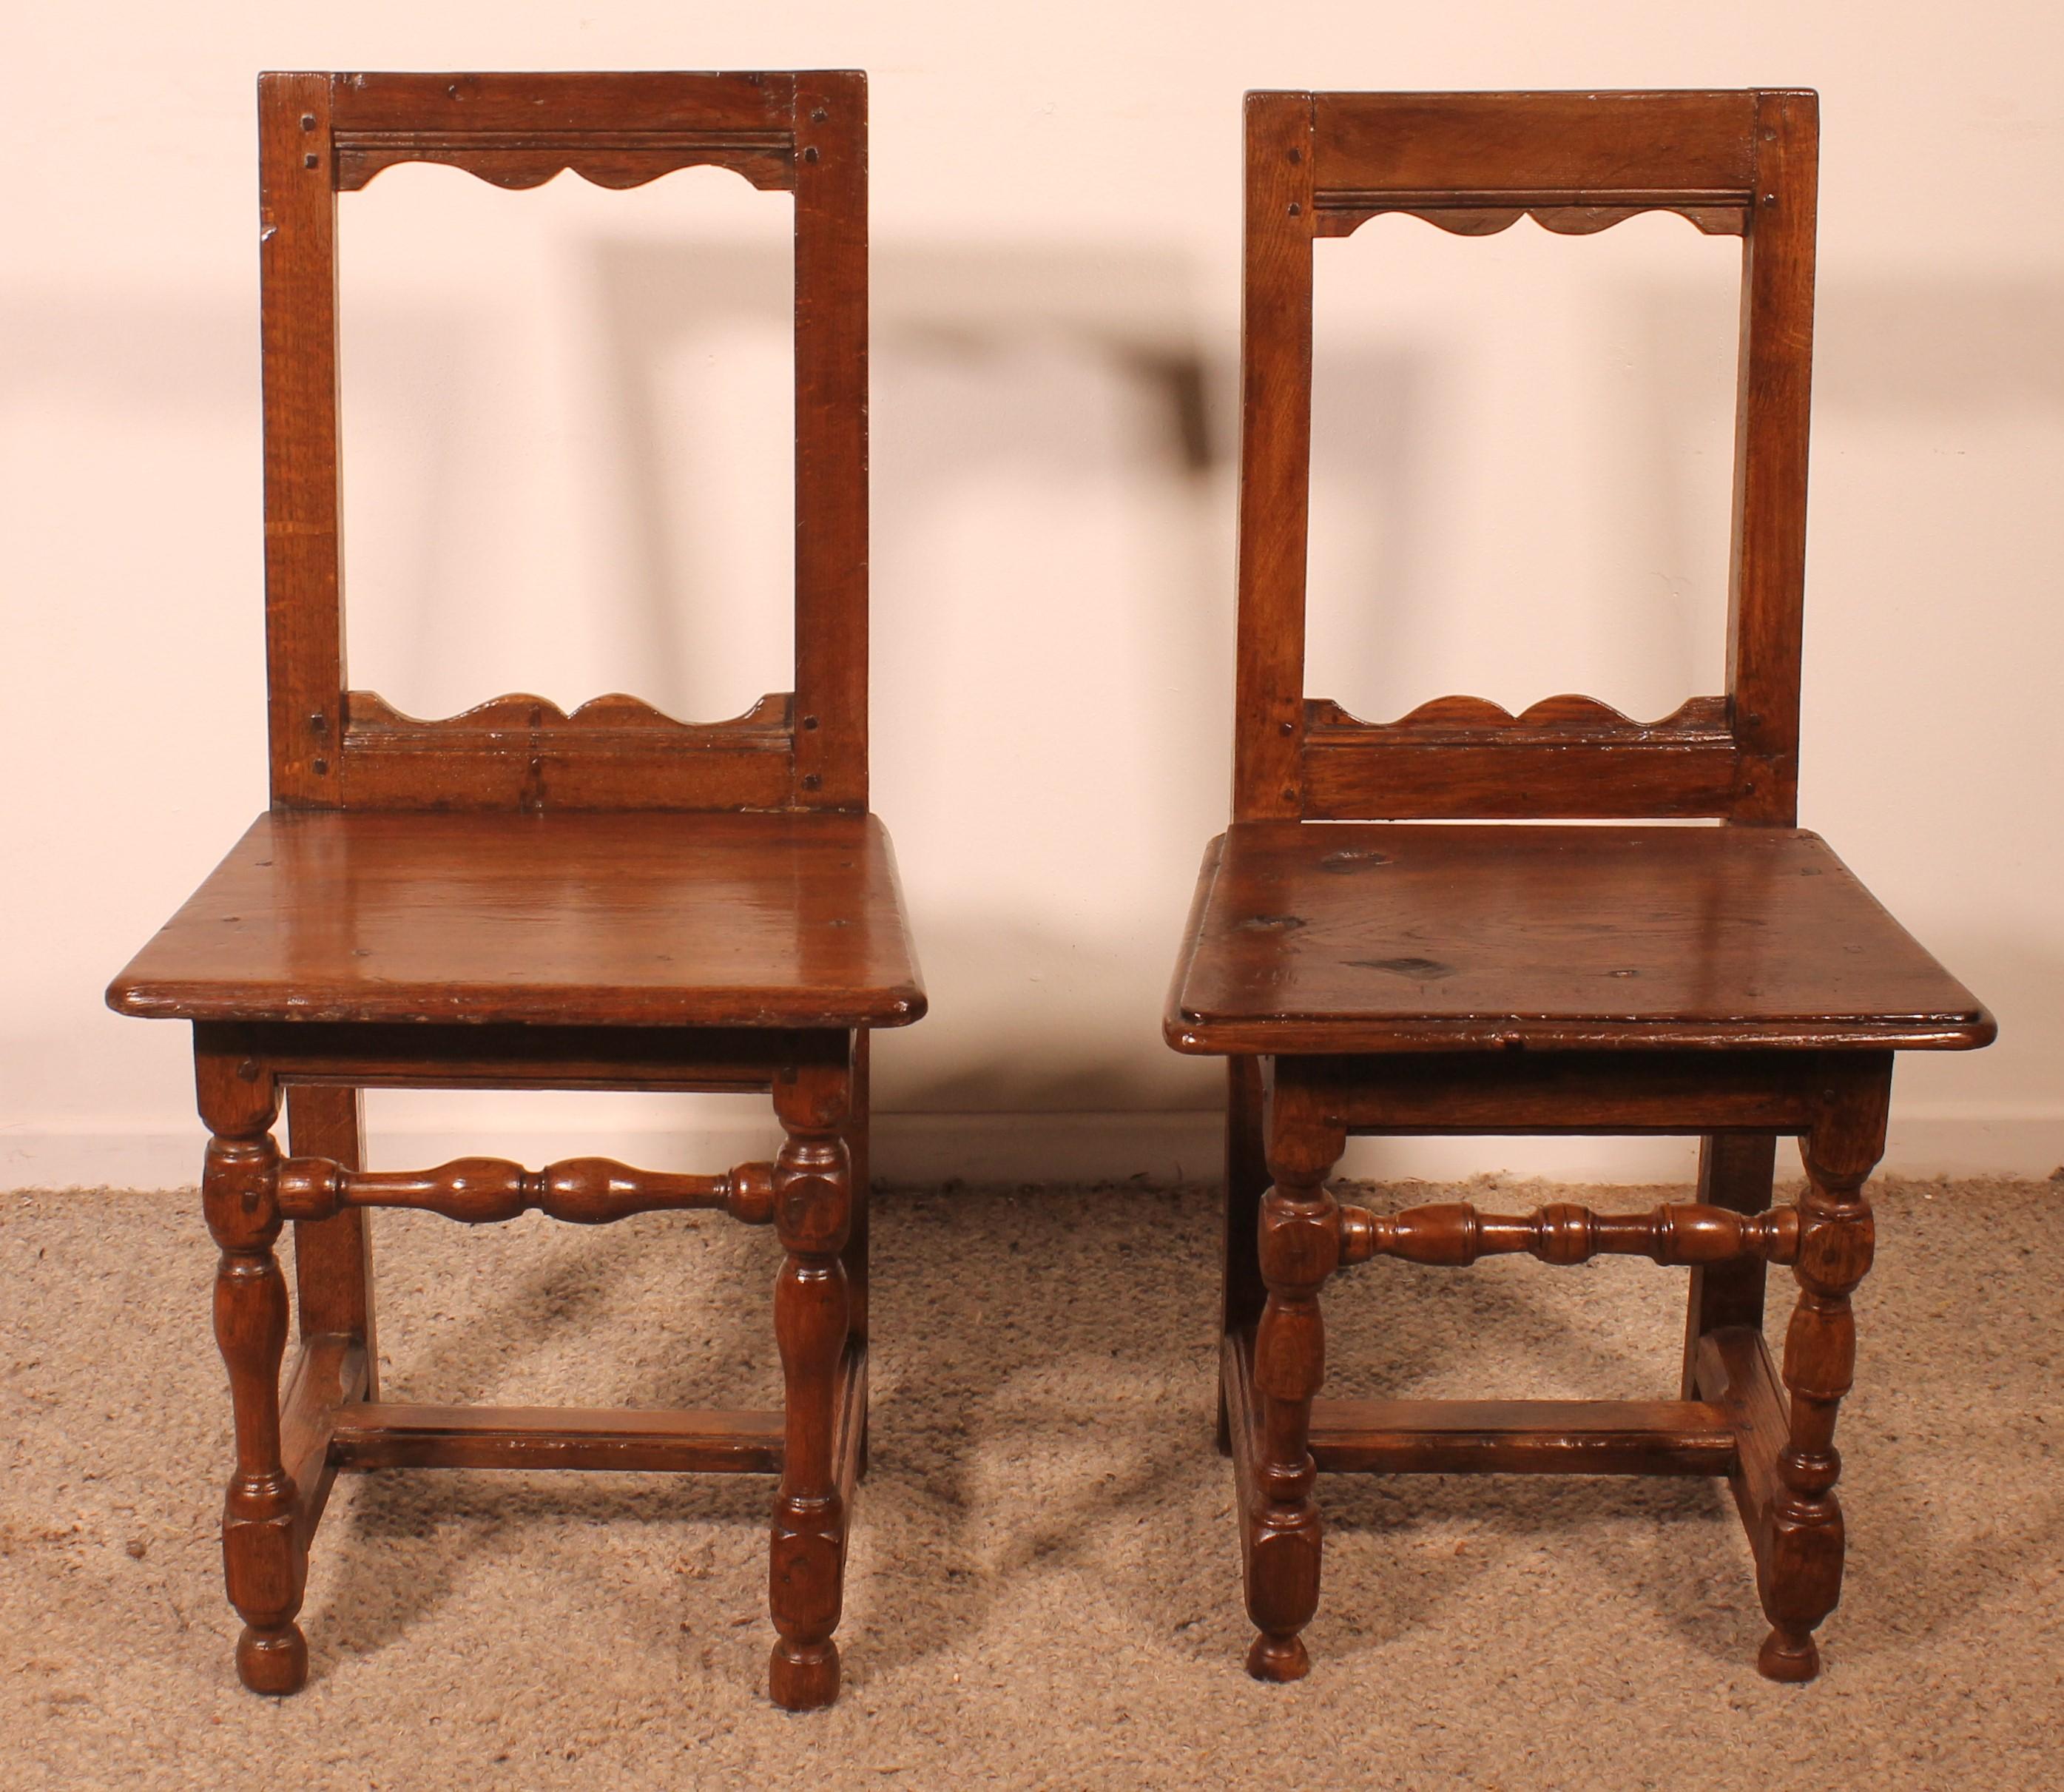 Louis XIII Set Of 4 Lorraine Chairs From The 18th Century In Oak For Sale